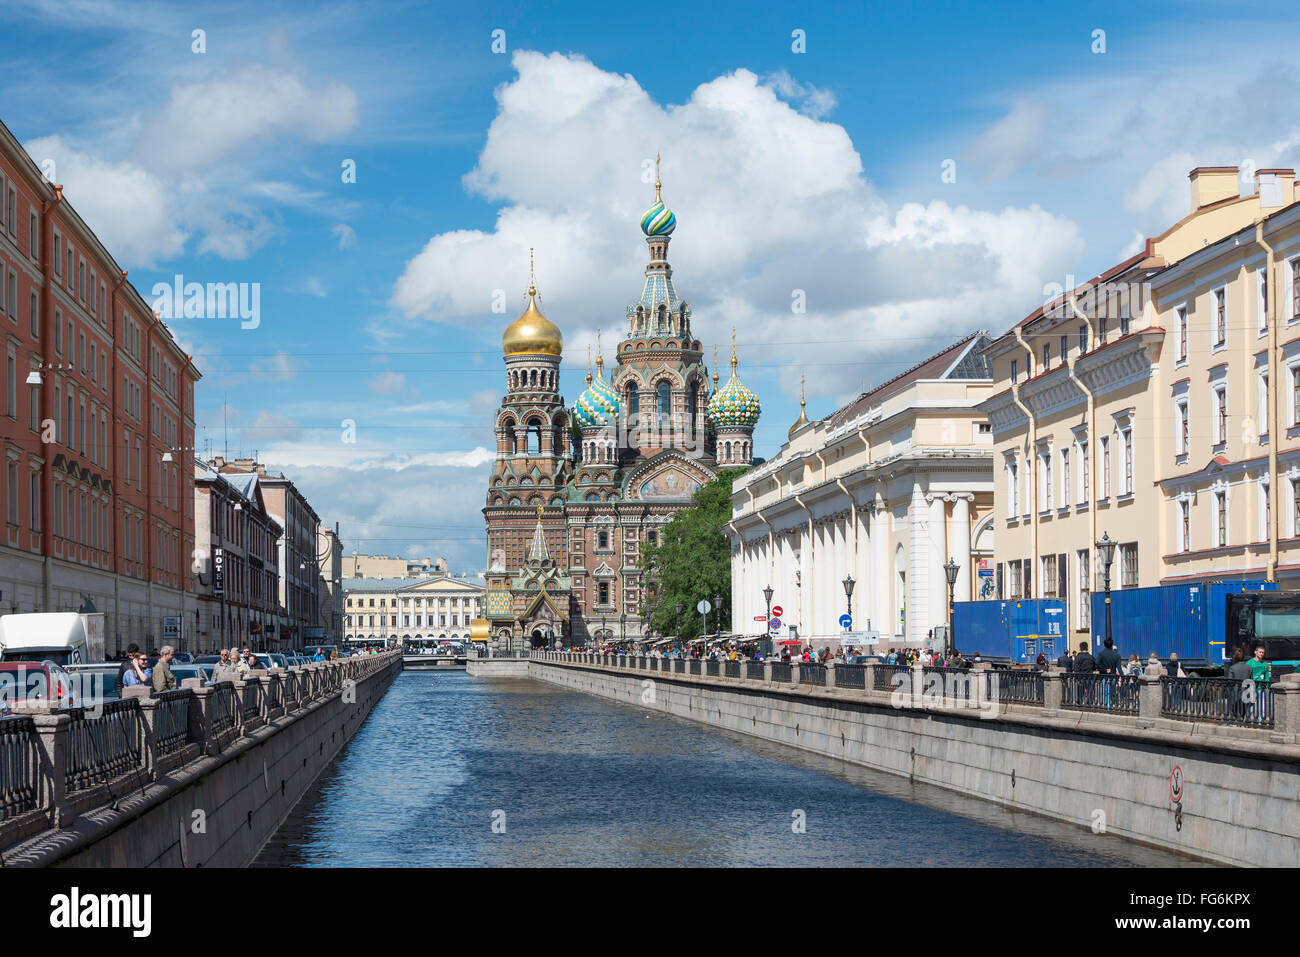 The Church of the Savior on Spilled Blood across Griboyedov Canal, Saint Petersburg, Northwestern Region, Russia Stock Photo